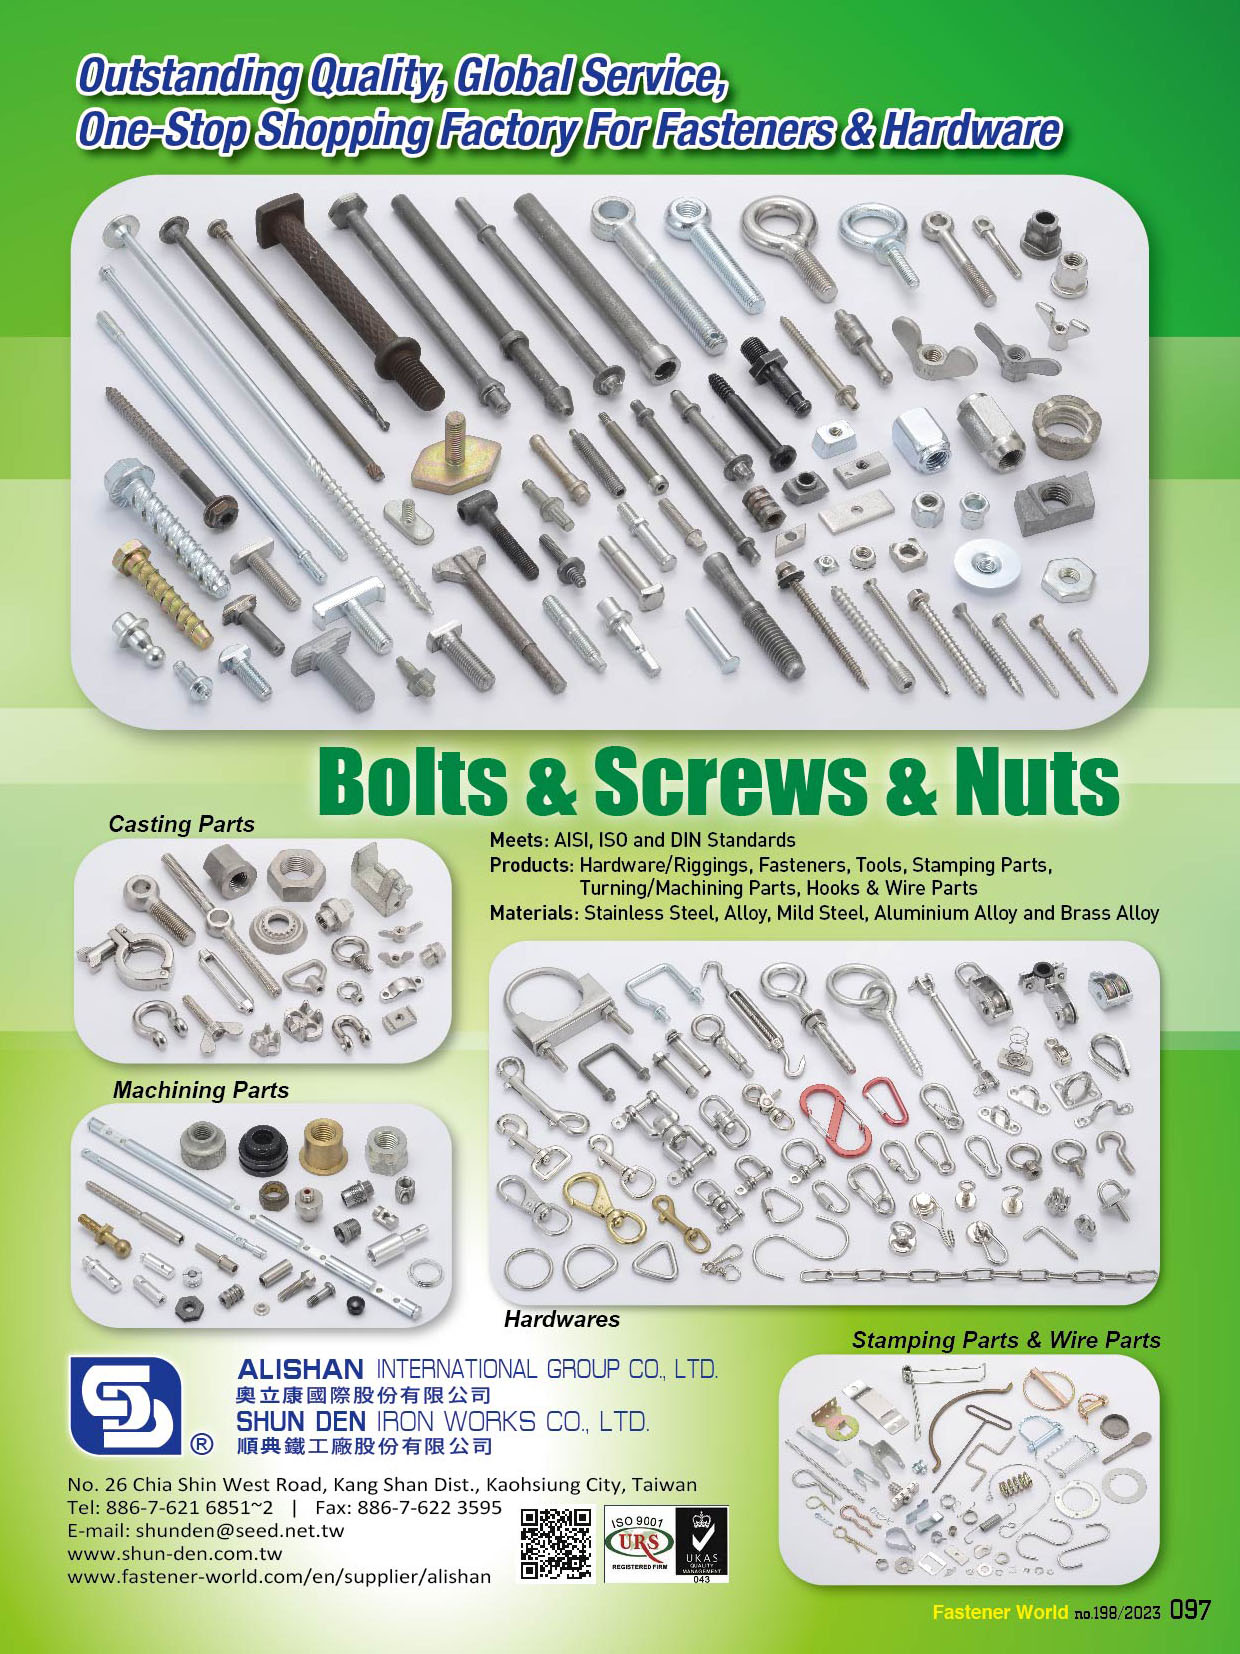 All Kinds of Screws,All Kinds Of Nuts,Stamped Parts,Eye Bolts,U Bolts,Clamps In General,Hooks,Machine Parts